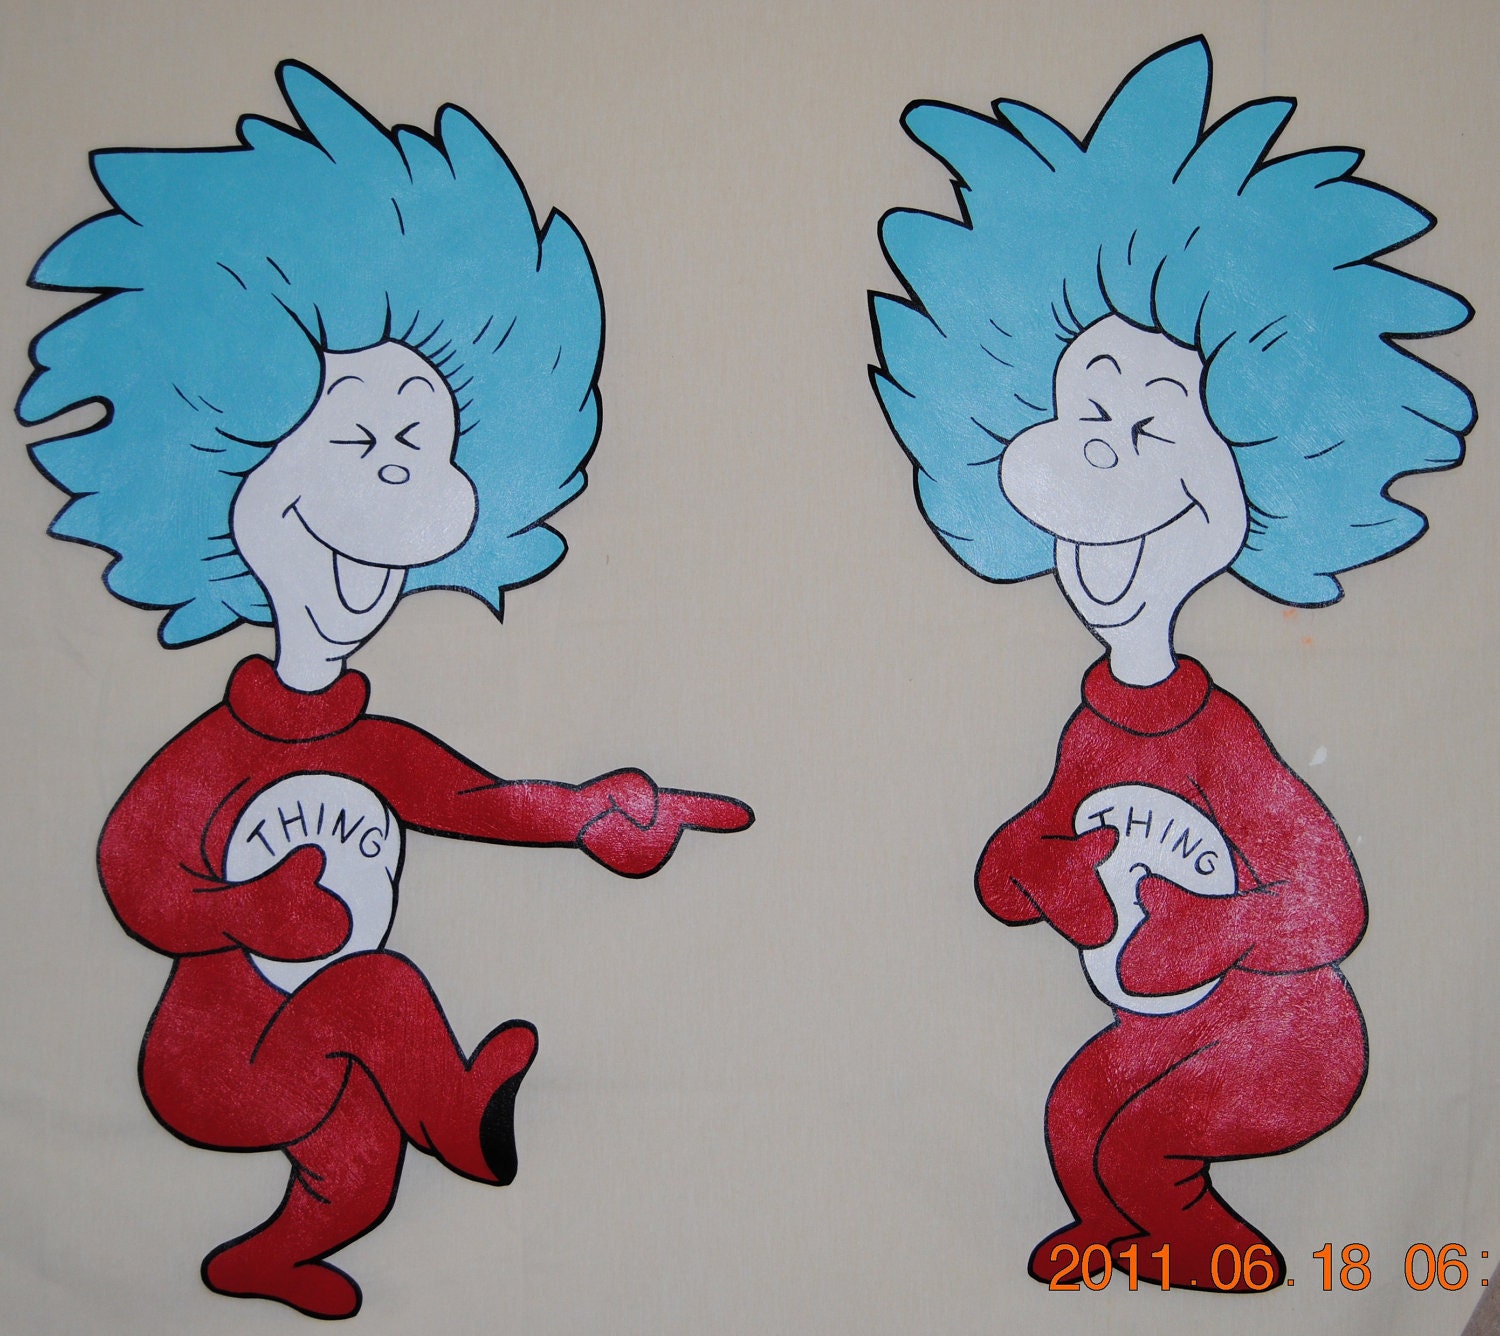 Dr Seuss Thing 1 and Thing 2 Wallpaper Mural 2 Piece by mamashpey1